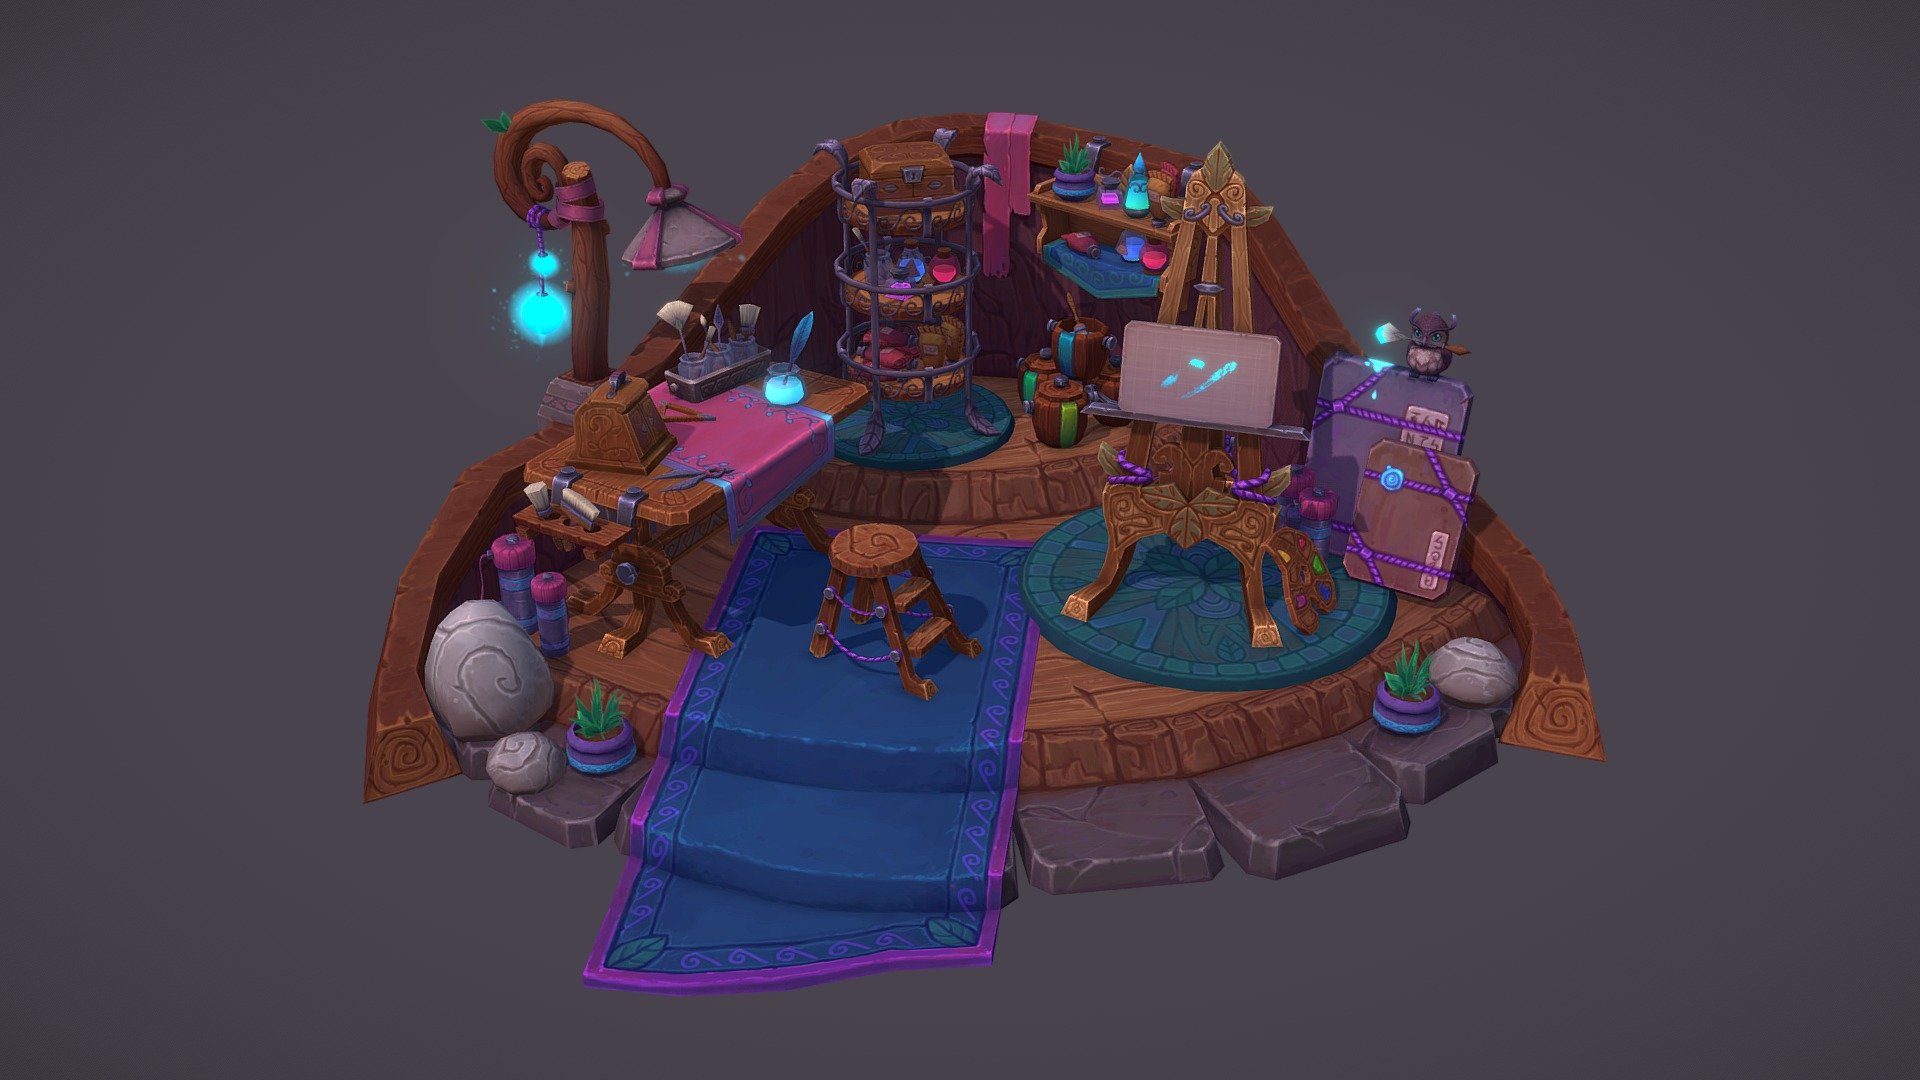 The props in this small diorama are inspired by the World of Warcraft night elf race. I really enjoyed the idea of a night elf art room and had a lot of fun creating all those various painting &amp; writing props that fill it 🖌

You can look here for more details &amp; concept art of this piece:
https://www.artstation.com/artwork/L2055R

Modeling, UV mapping &amp; animation are done in Maya, the textures are hand painted in 3DCoat &amp; Photoshop 3d model